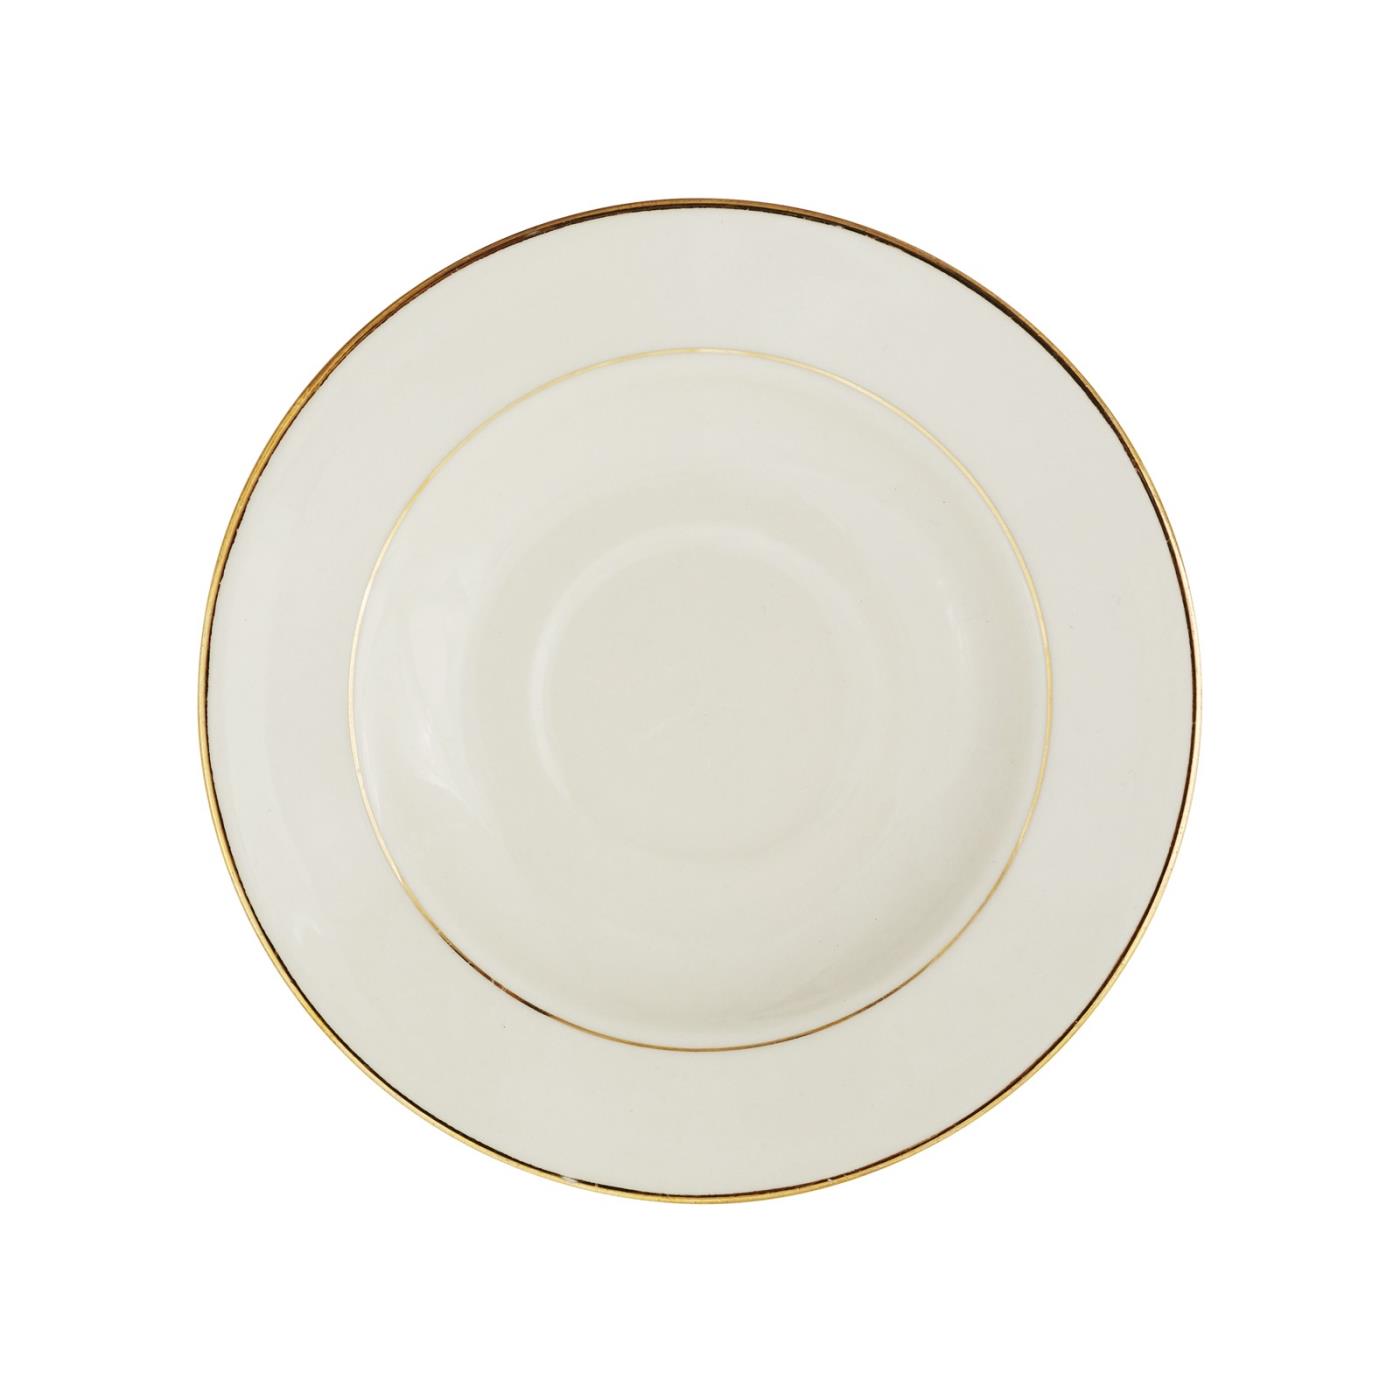 Ecru with Gold Rim Collection -  Saucer 6"